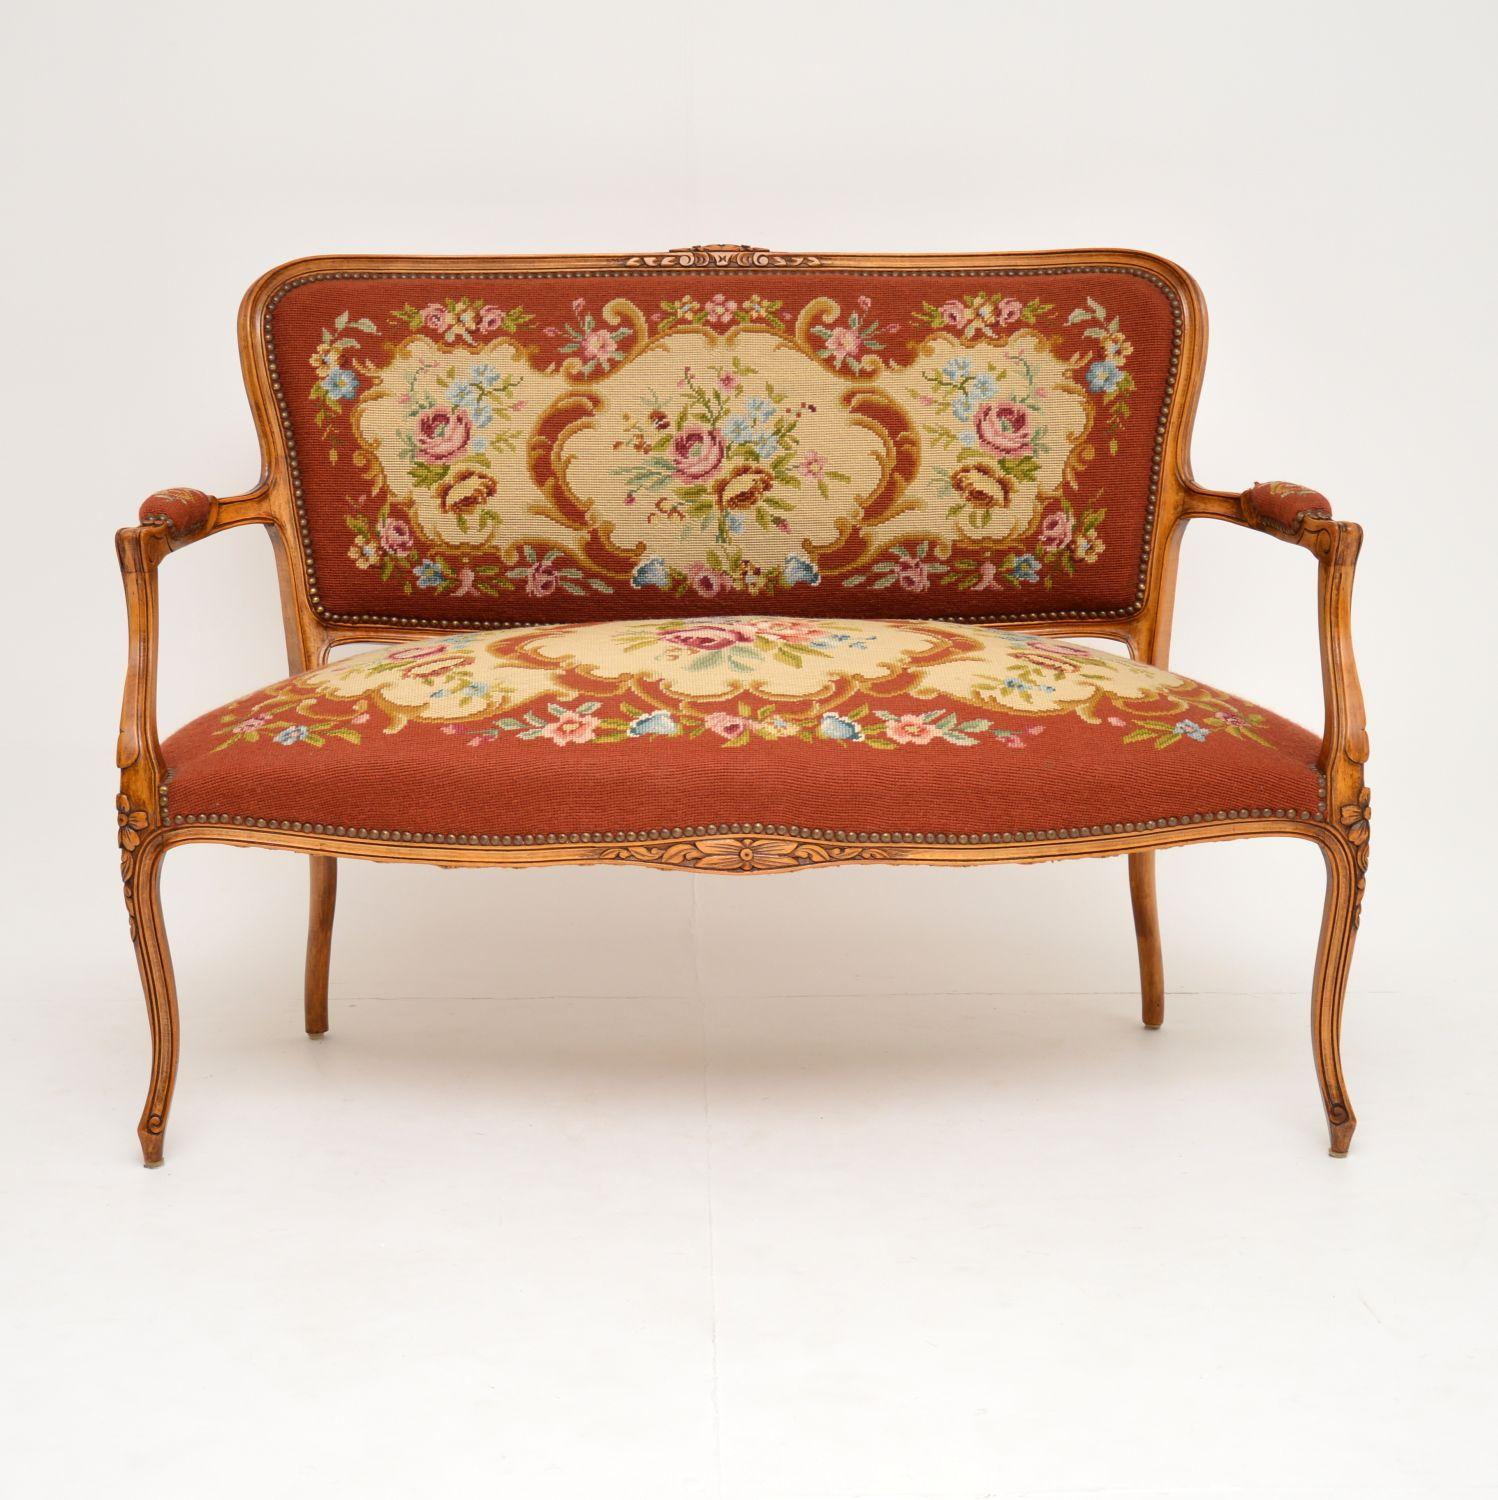 This antique French sofa is in excellent original condition & dates from around the 1890-1910 period.

What’s nice, is that it still has the original needlepoint fabric which is in very good condition. It has a sturdy solid walnut or beech frame